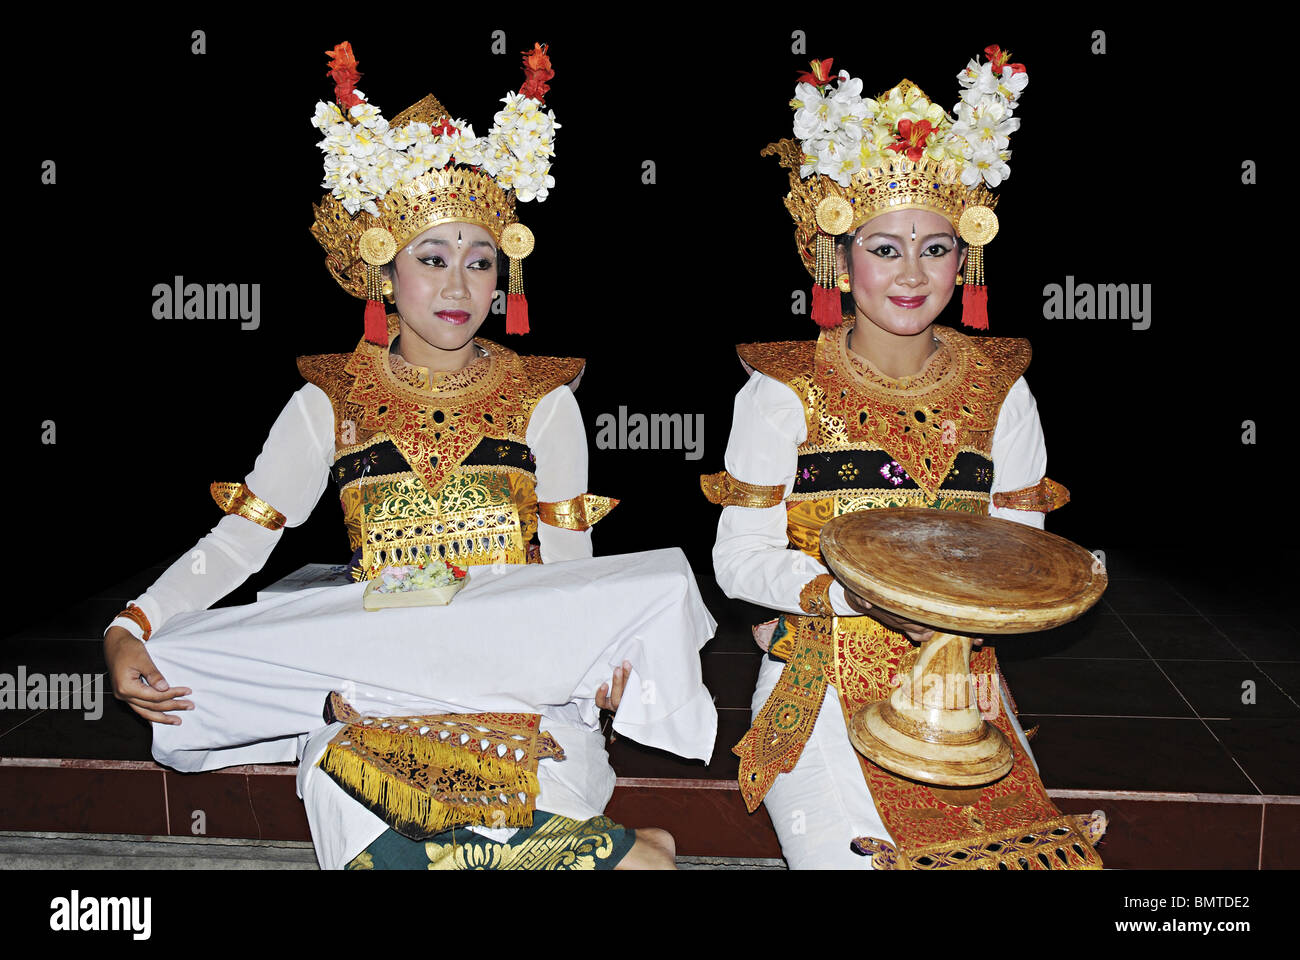 Indonesia-Bali, Balinese girls getting ready to perform the Balinese dance. Stock Photo